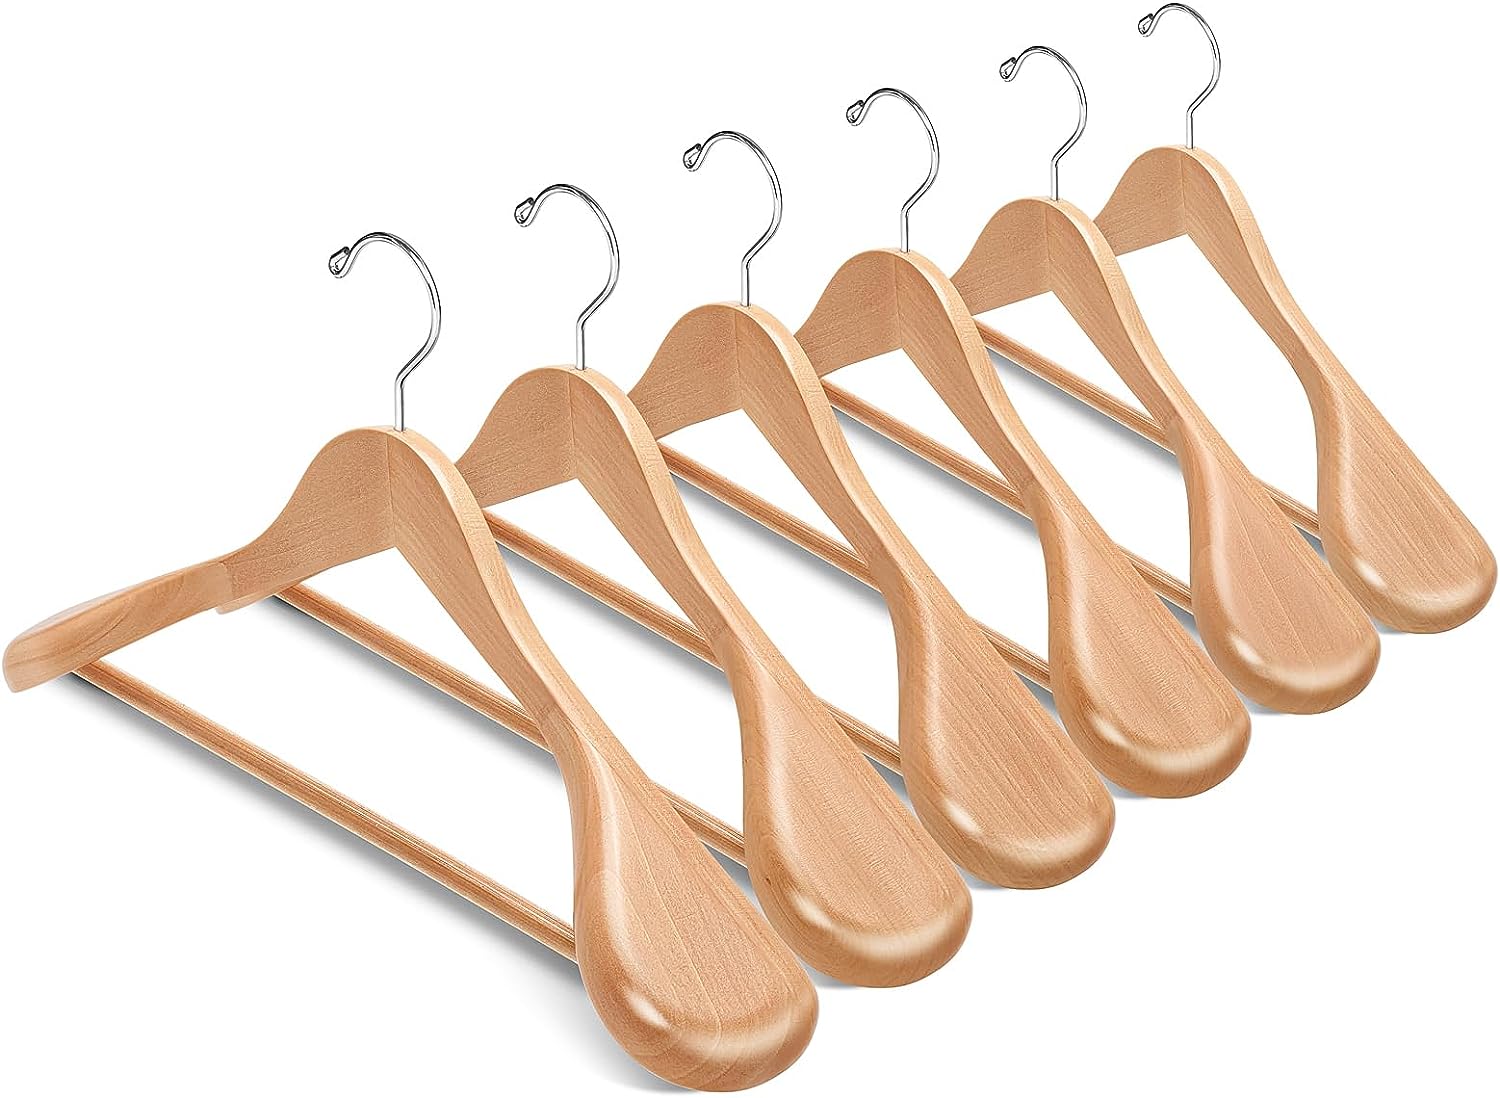 Amber Home Wooden Suit Hangers with Pants Bar.